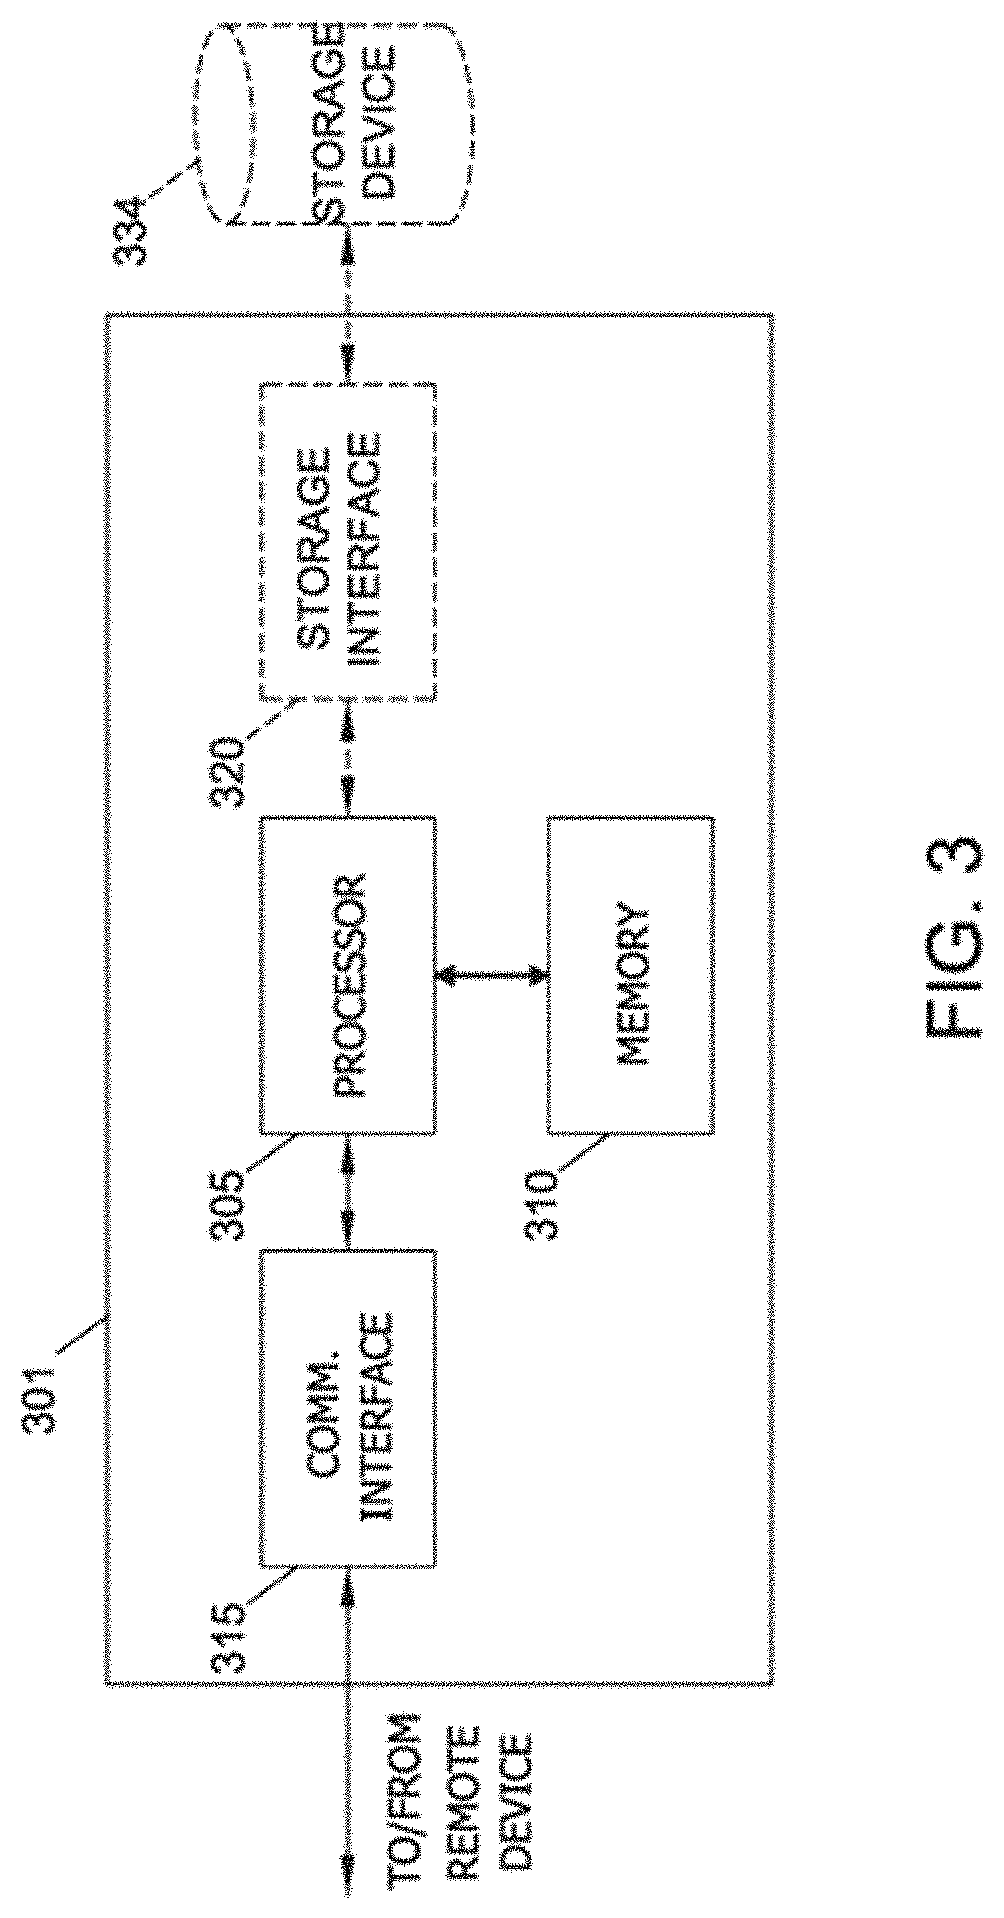 Systems and methods for authenticating online users and providing graphic visualizations of an authentication process